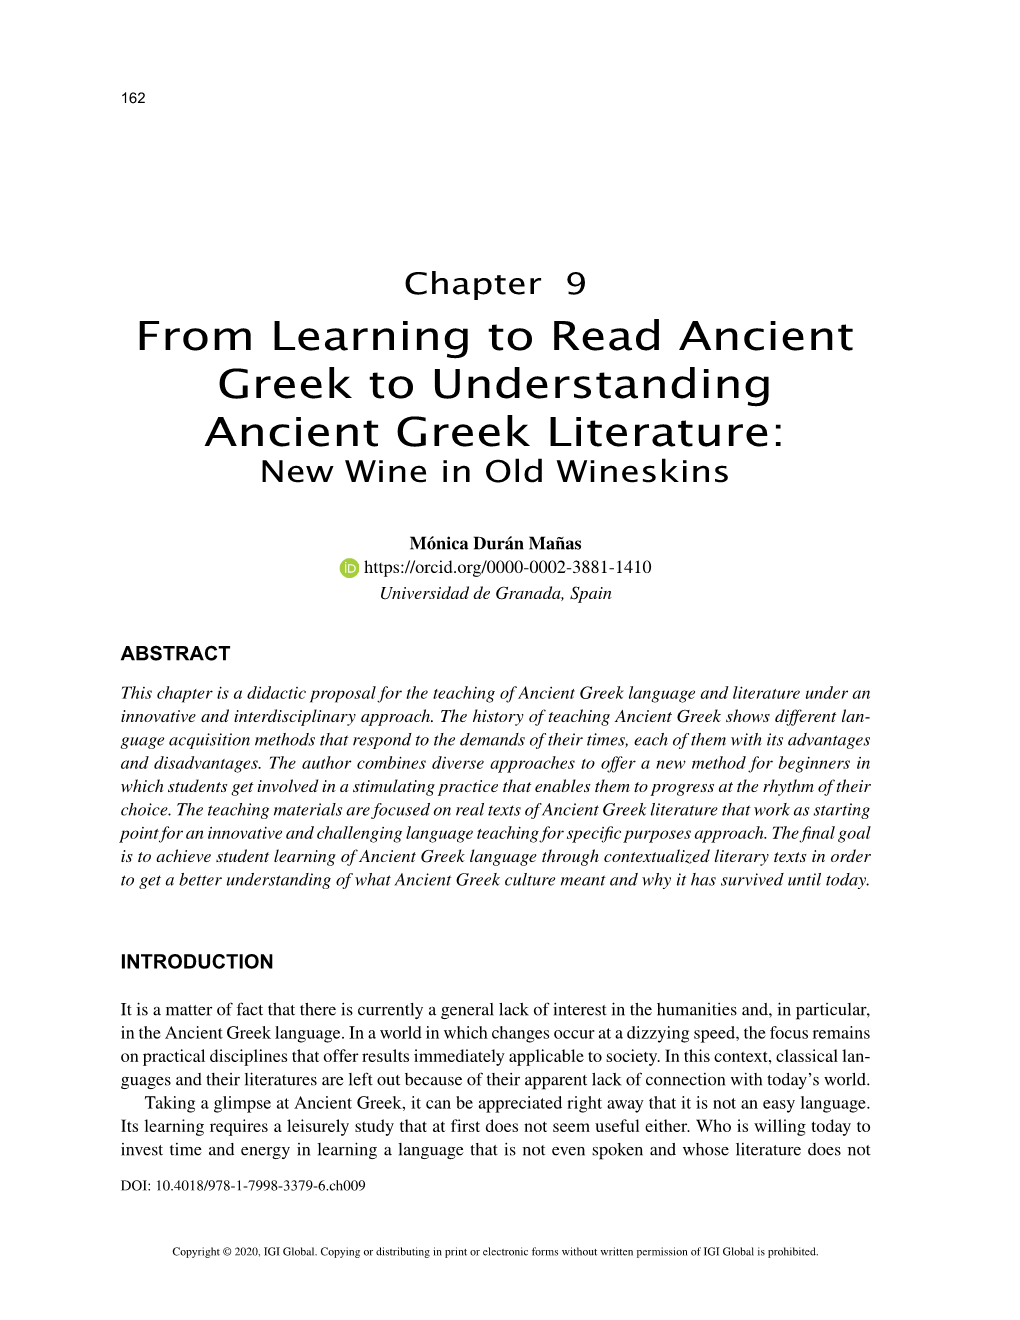 From Learning to Read Ancient Greek to Understanding Ancient Greek Literature: New Wine in Old Wineskins